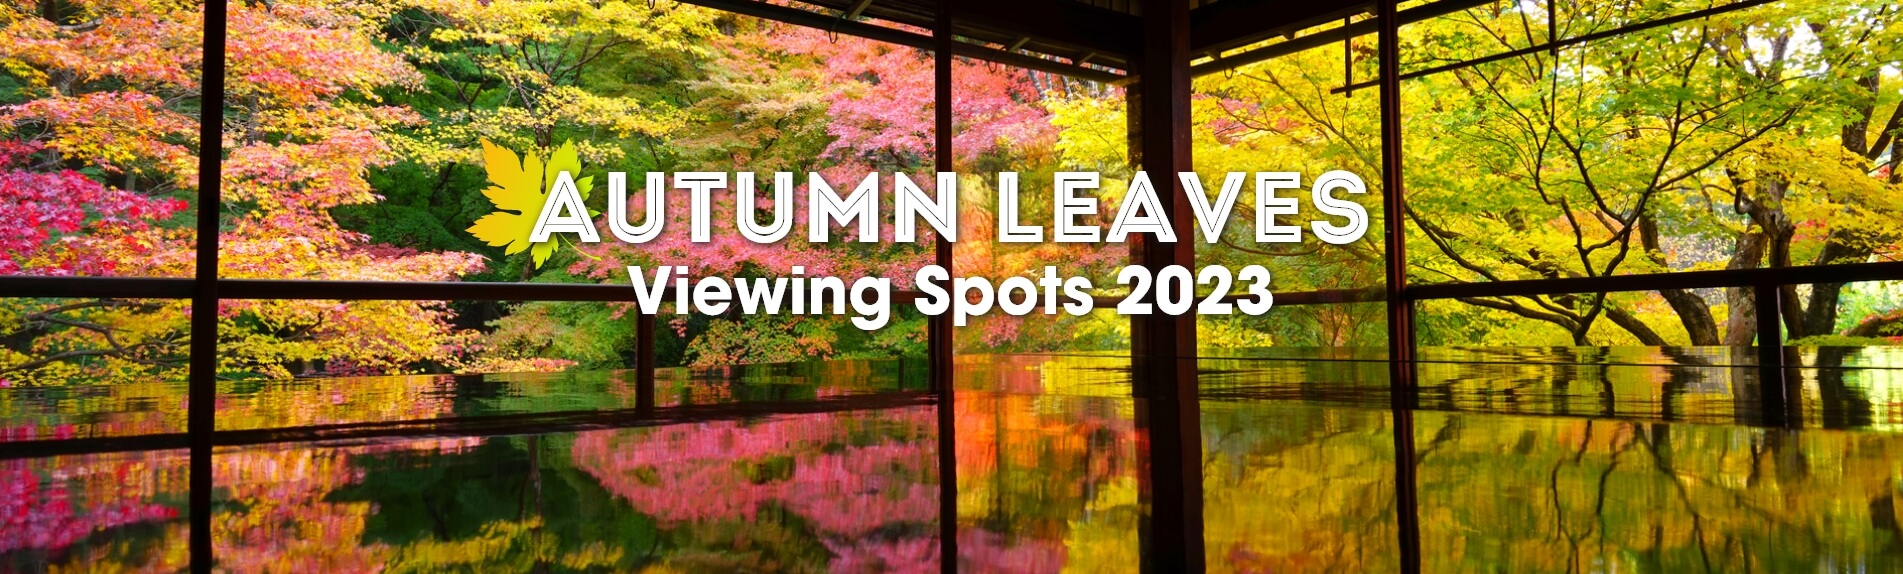 Autumn Leaves Viewing Spots 2023